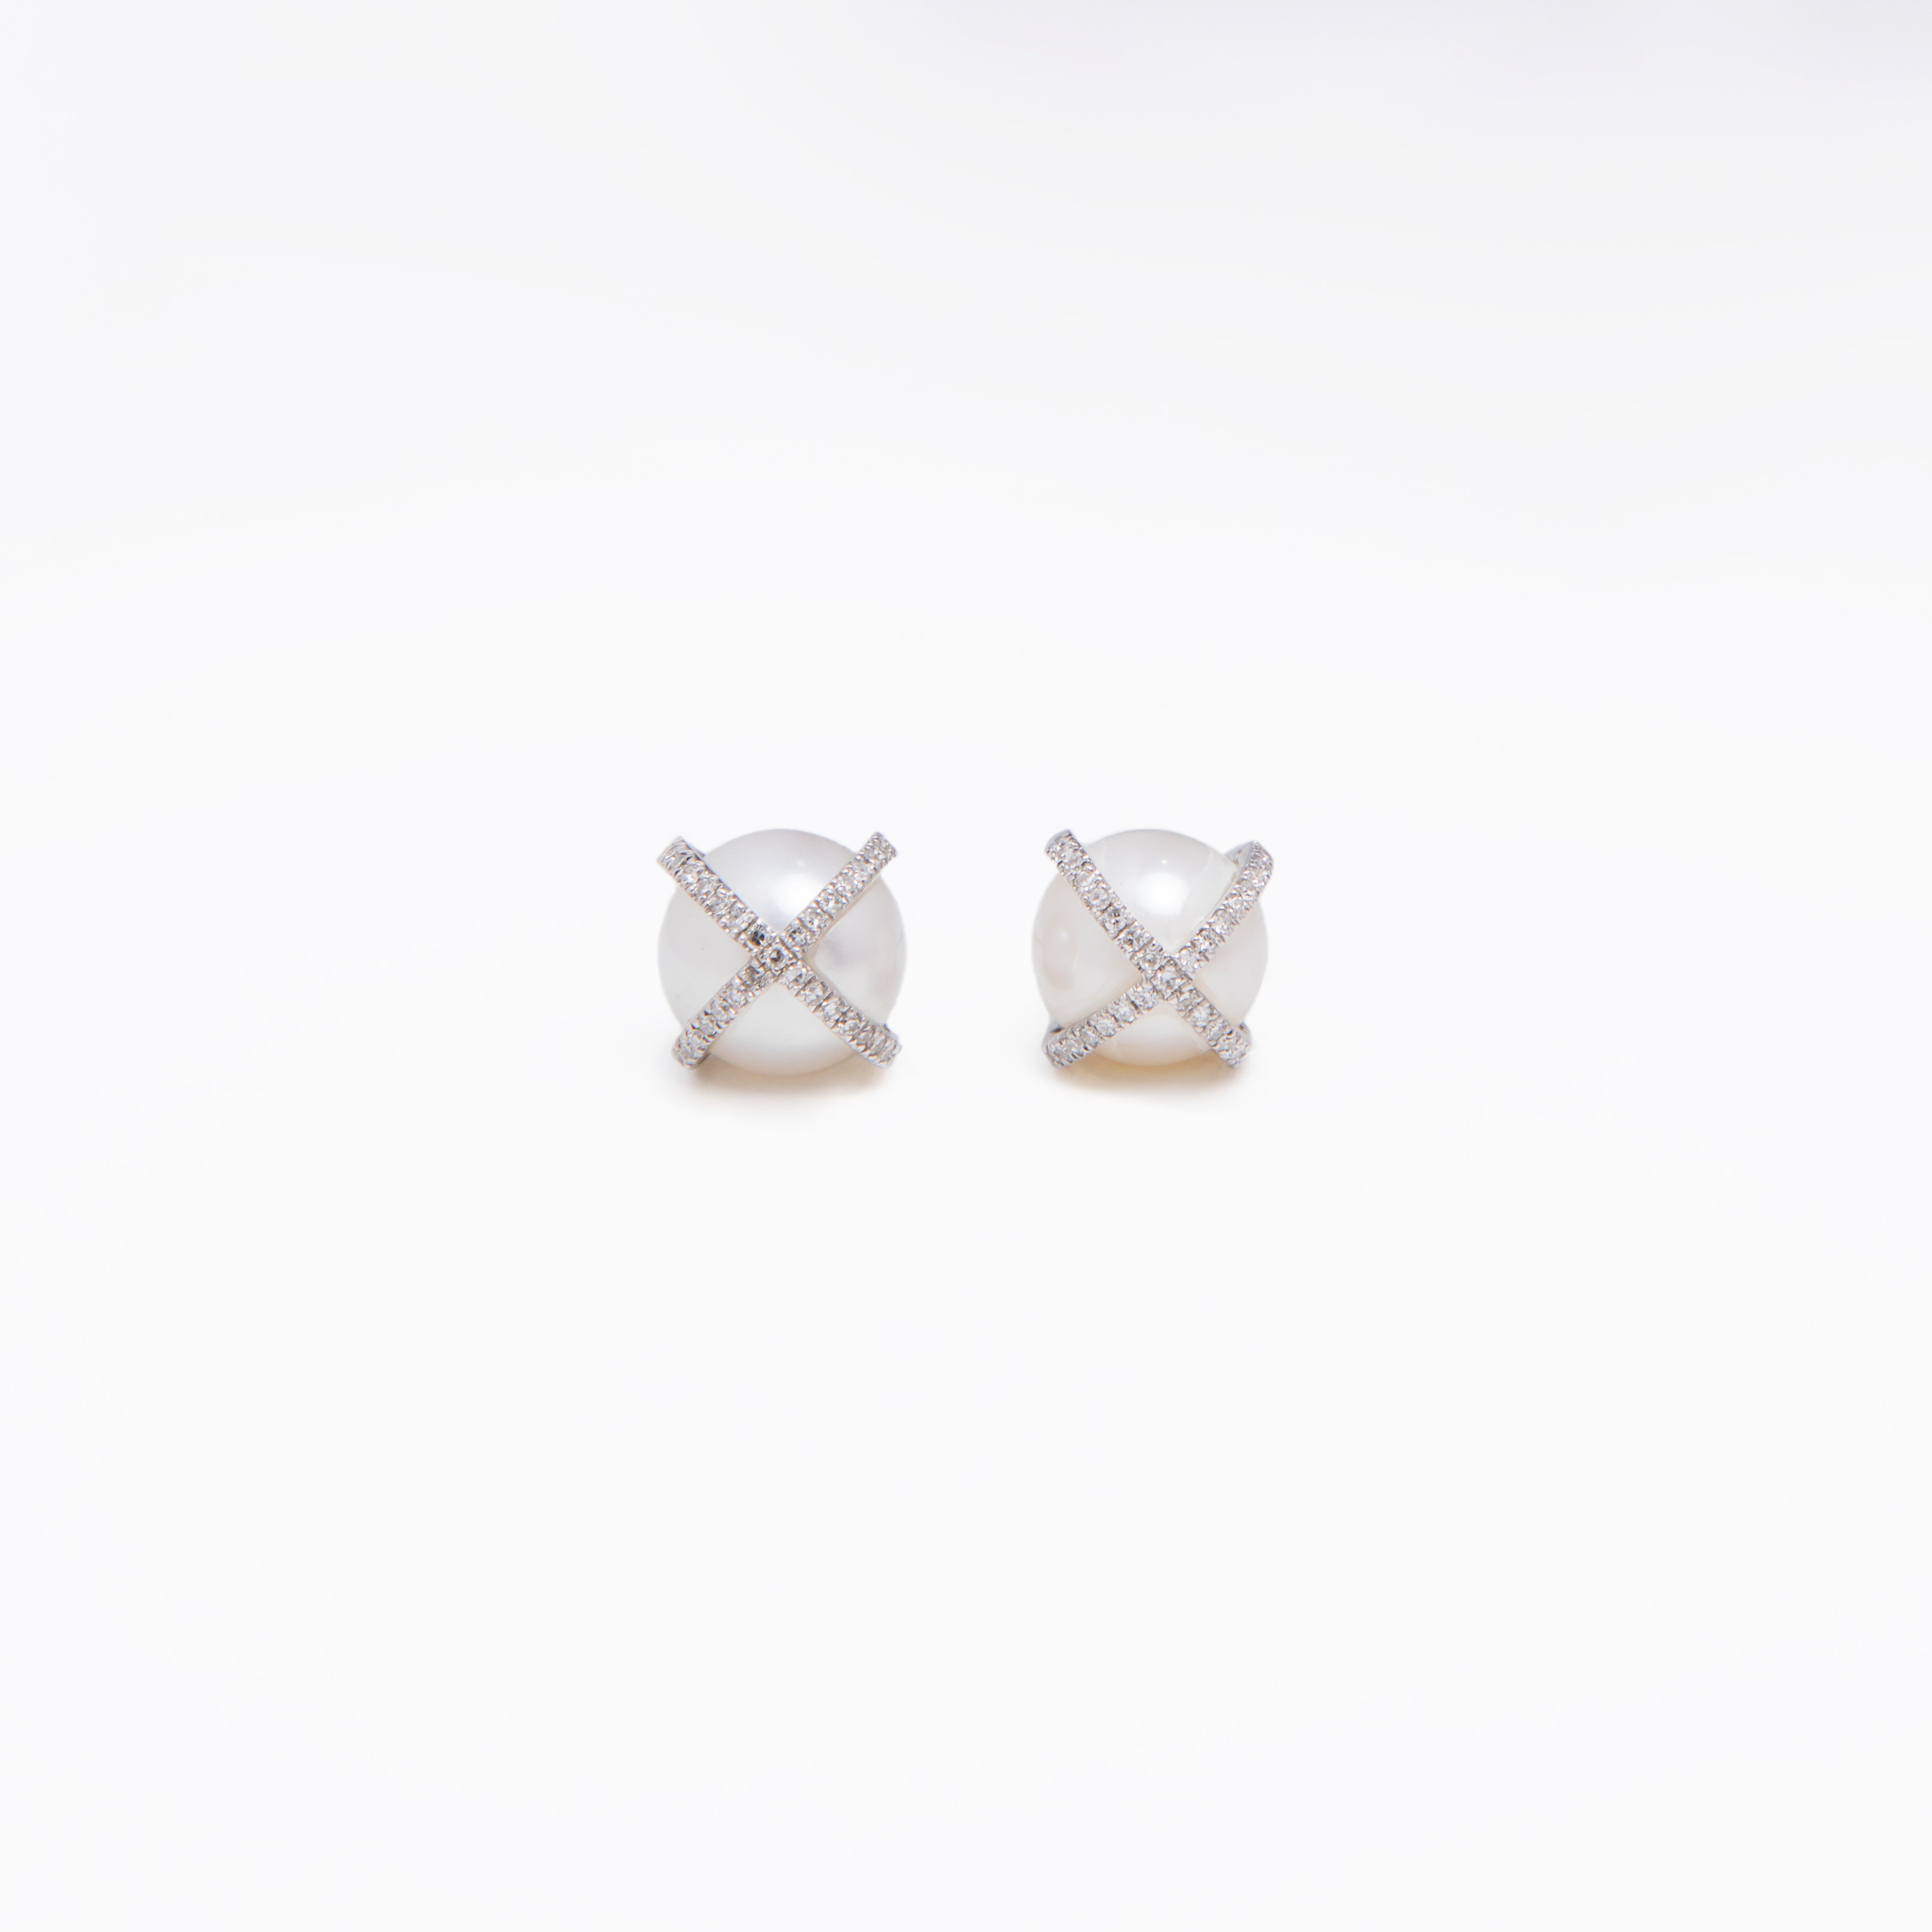 WD417, 14kt gold, pearl stud with pave x diamond stud earrings